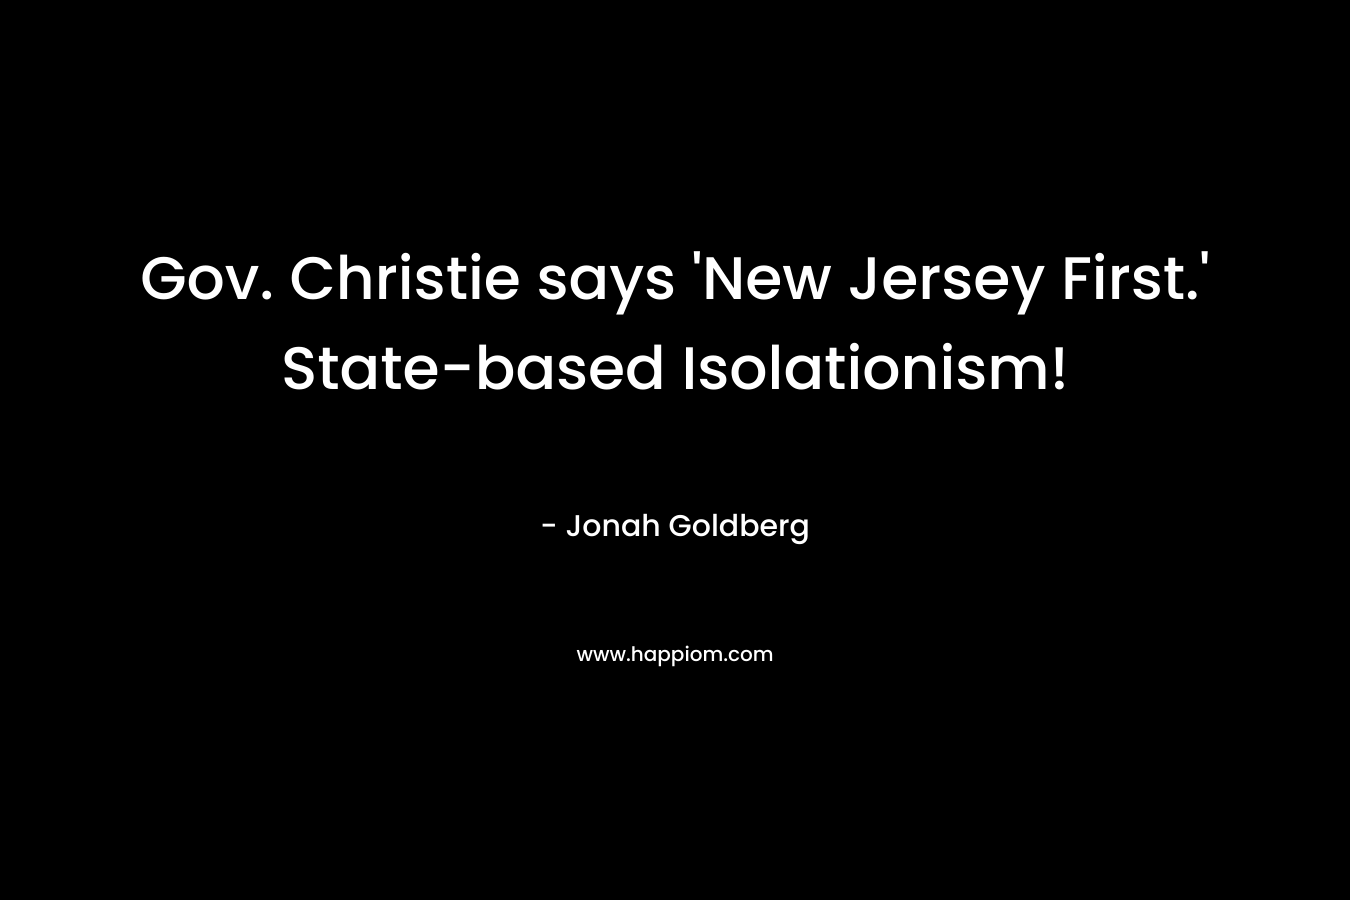 Gov. Christie says 'New Jersey First.' State-based Isolationism!